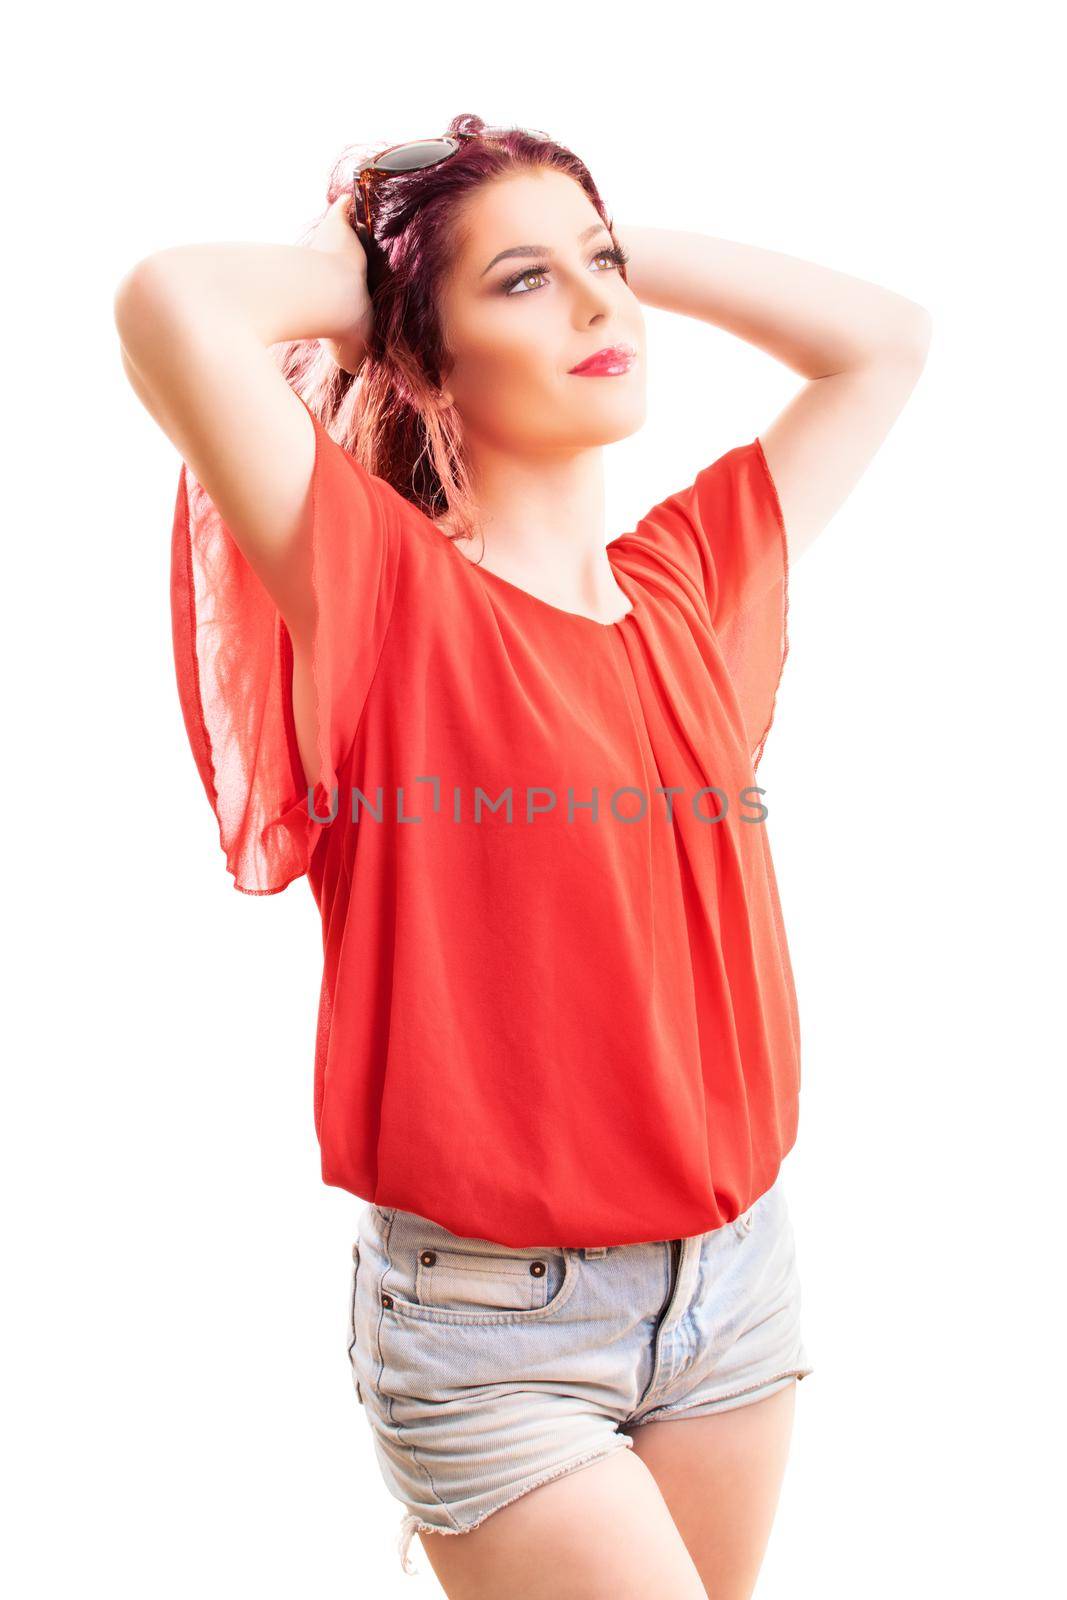 Redhead woman with wavy hair in fashionable summer outfit by Mendelex